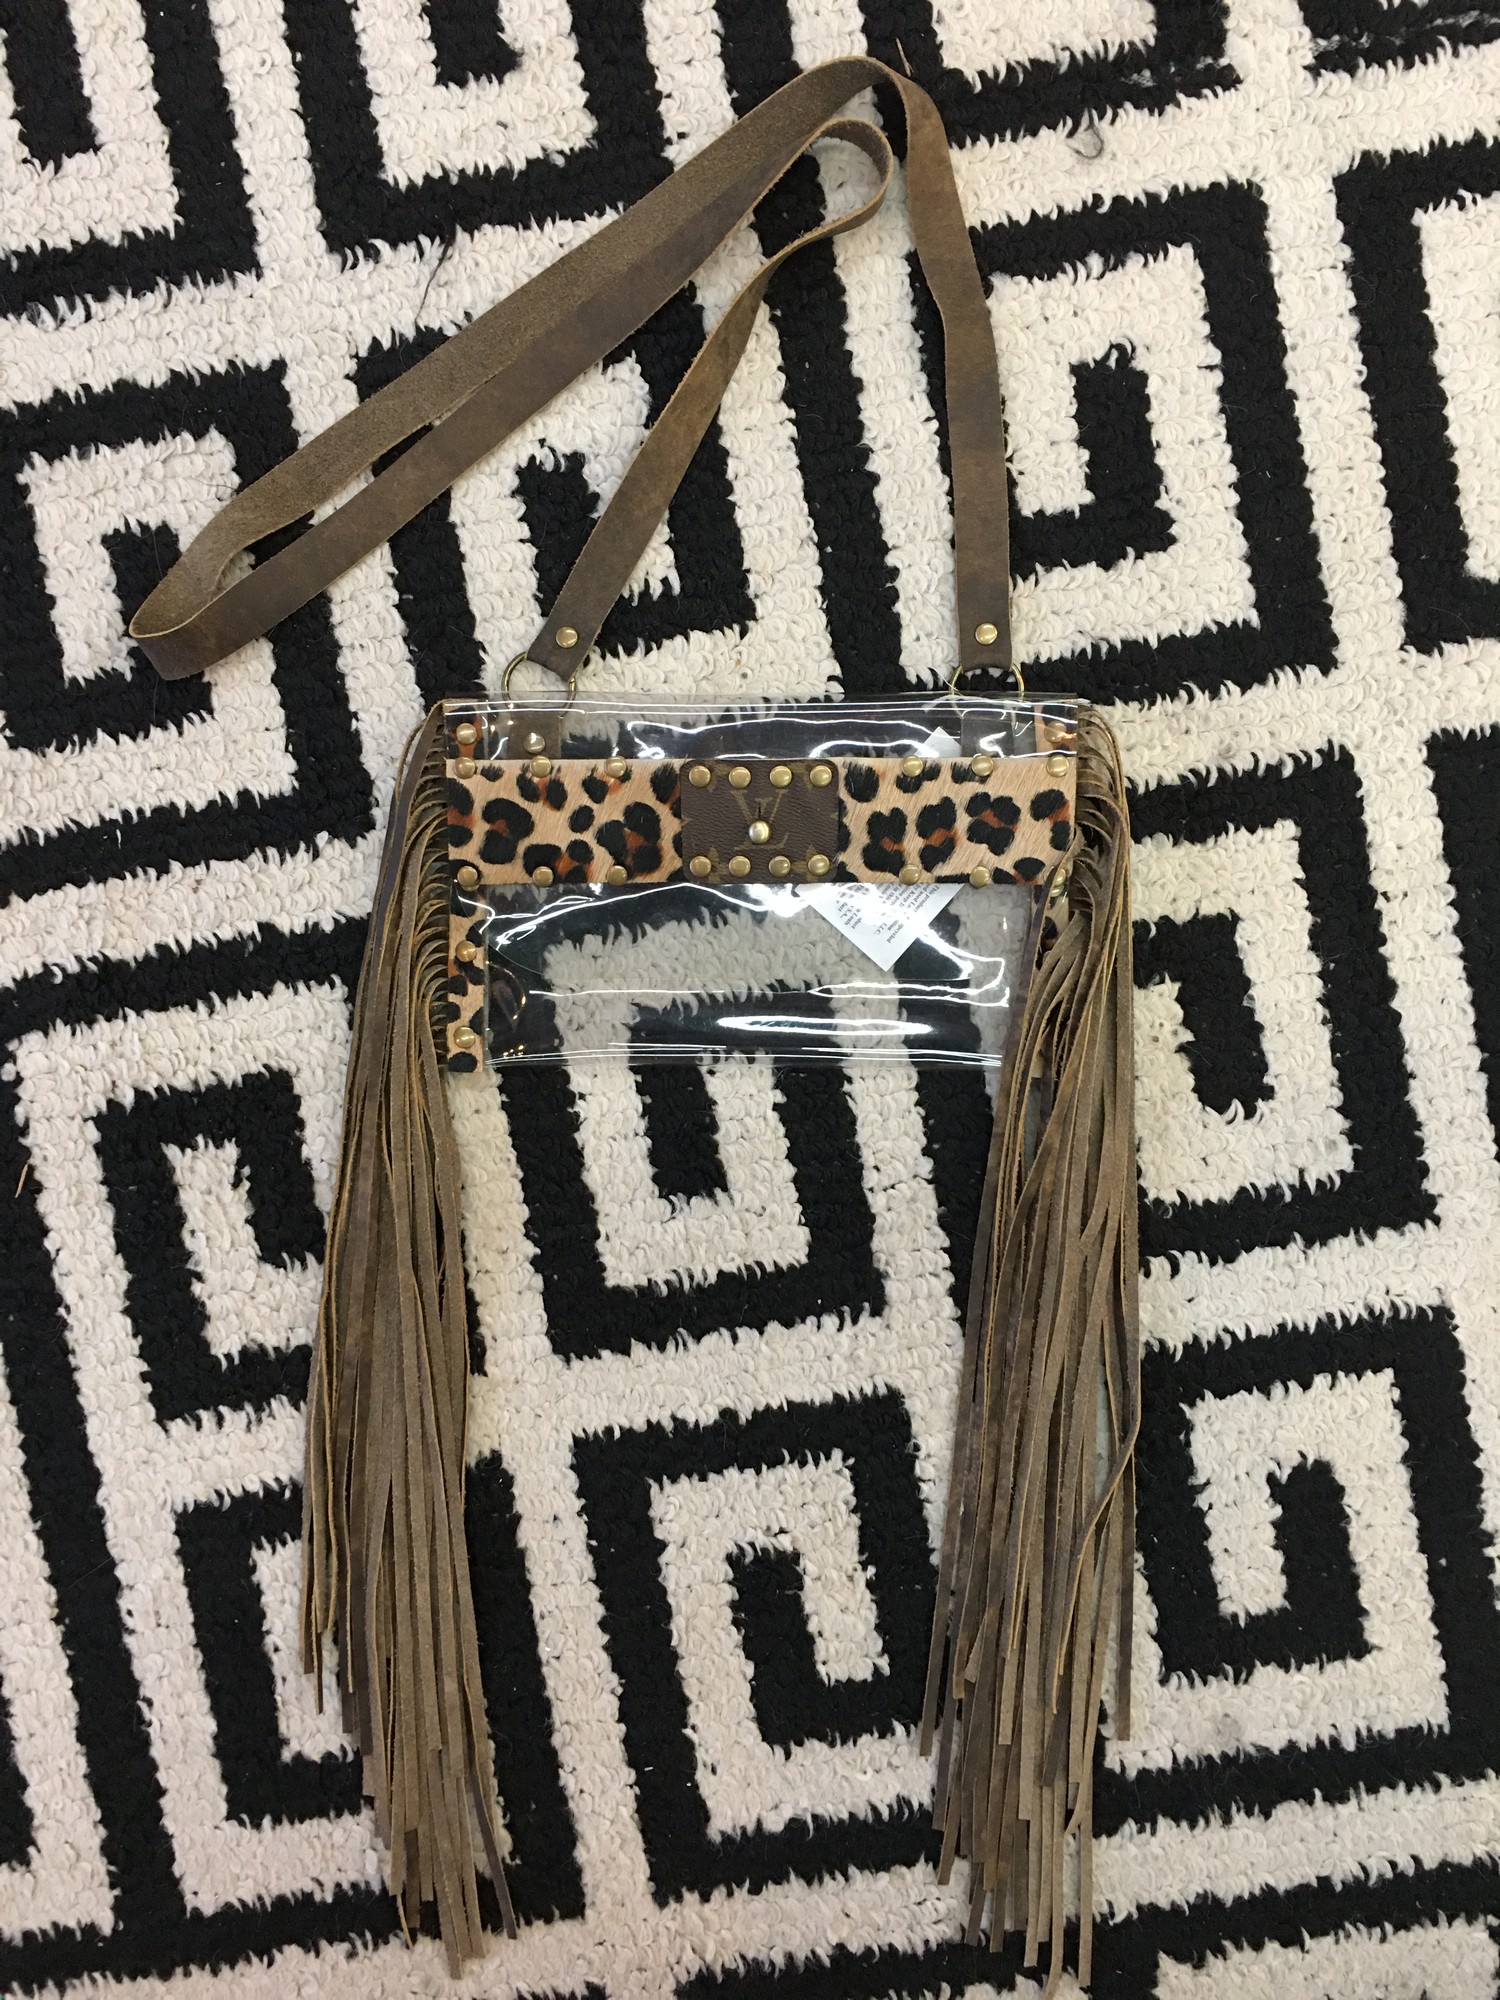 HANDMADE Louis Vuitton clear crossbody. Made with thin, clear plastic, faux cheetah fur, and real leather fringe and strap. This item is staduim approved, so it's perfect for football games, concerts, and other stadium events! This item is made from upcycled Louis Vuitton bags!